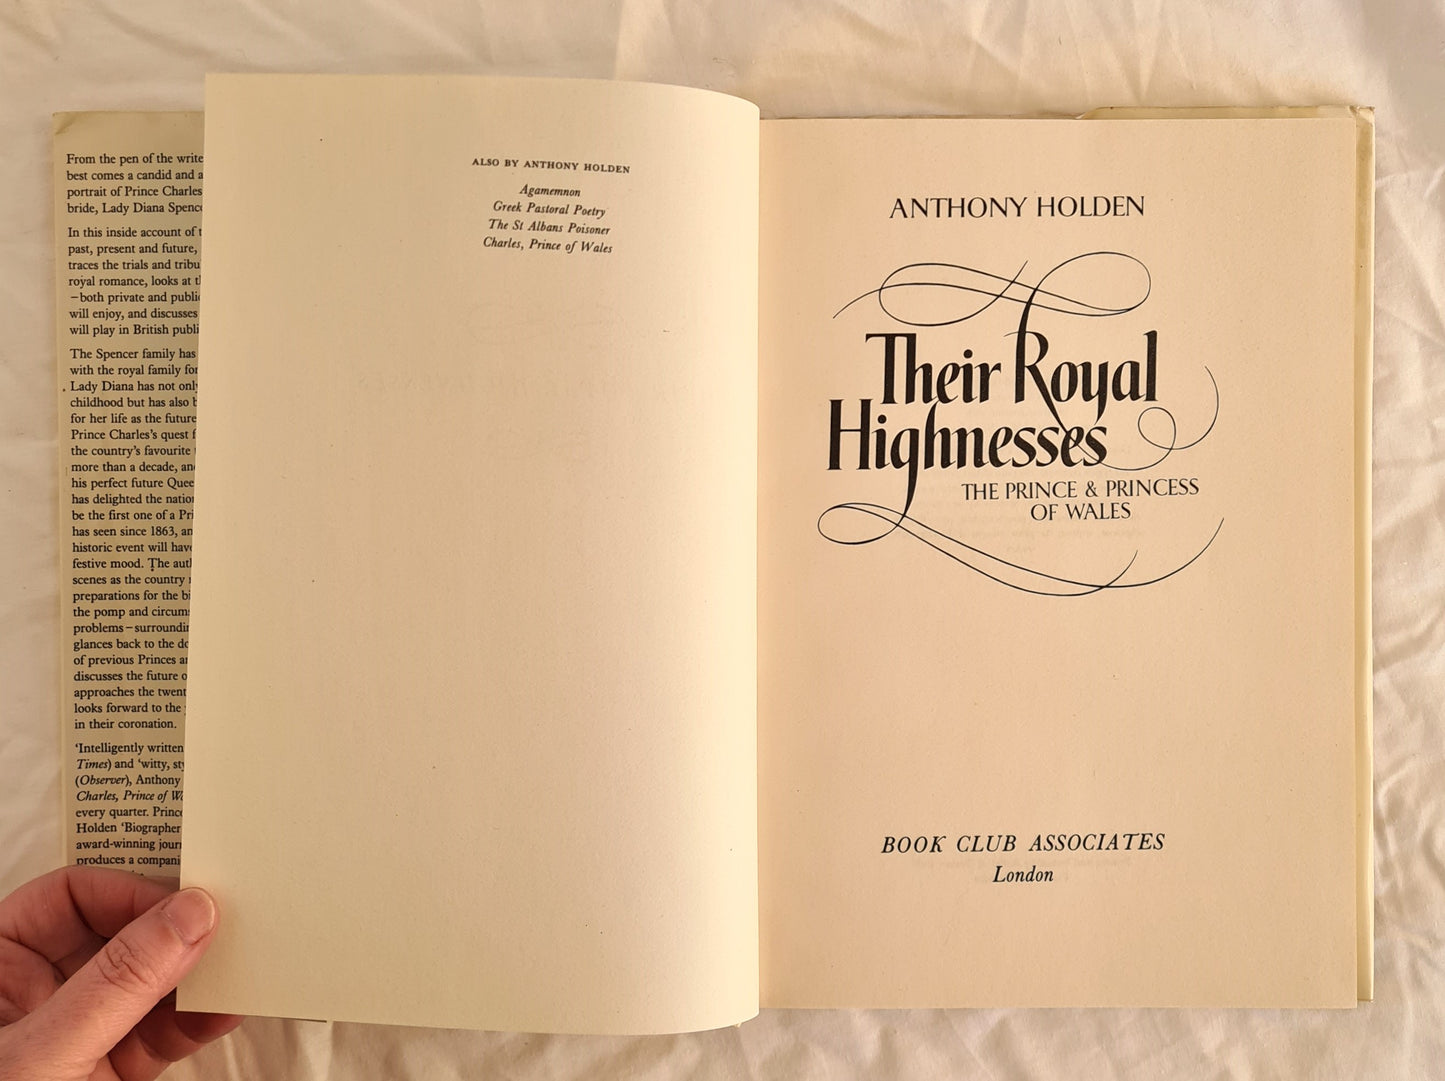 Their Royal Highnesses by Anthony Holden